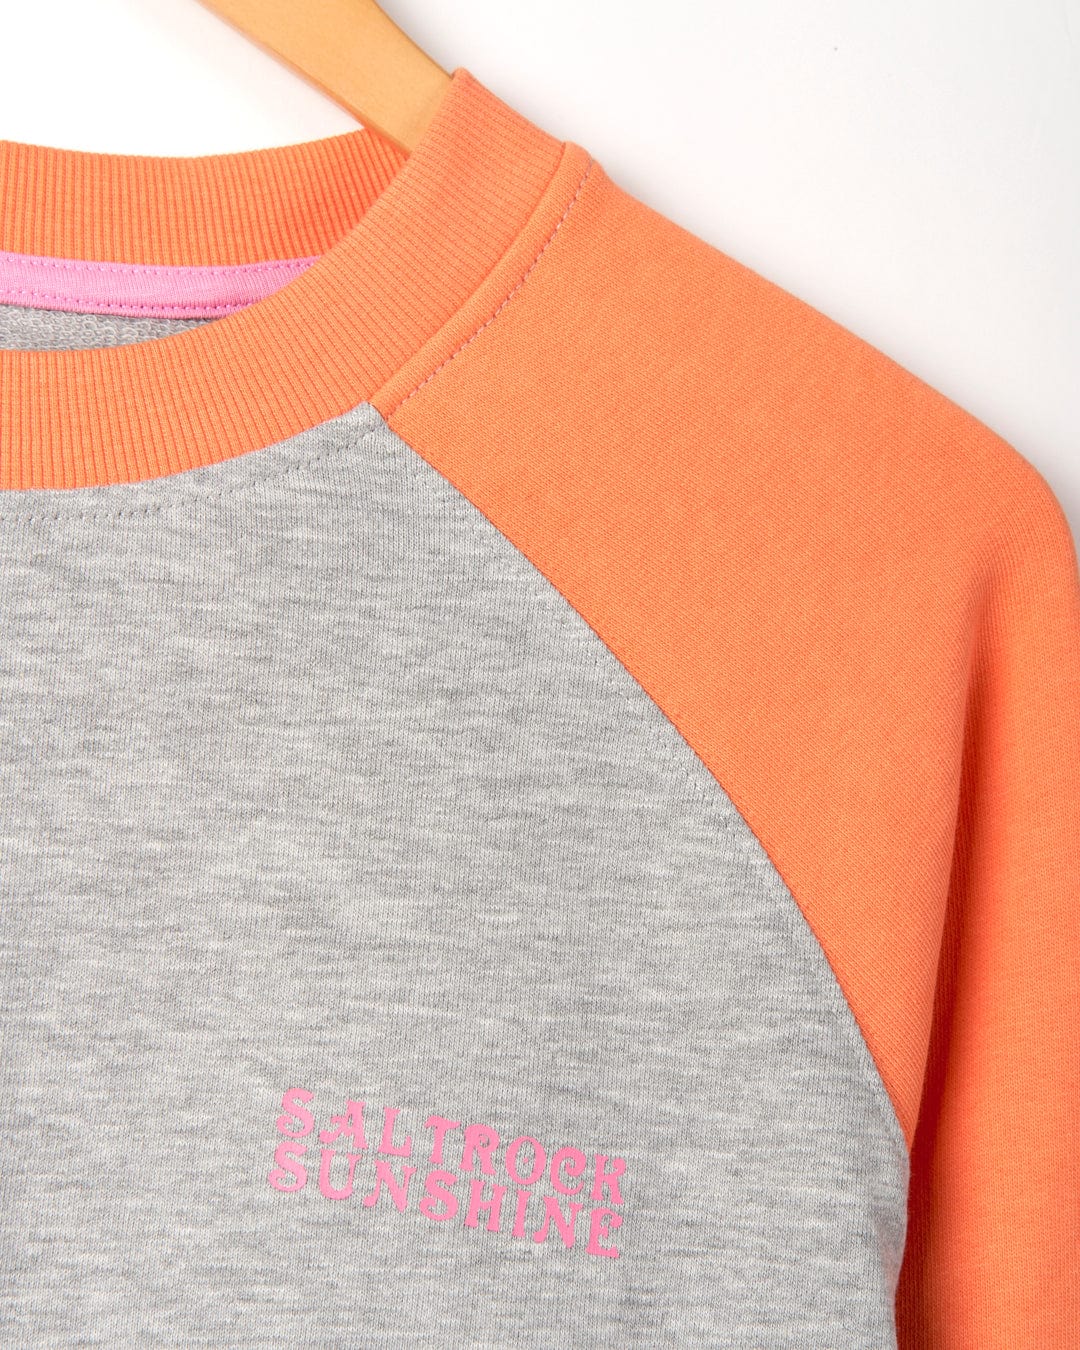 Close-up of a two-toned Saltrock Sunshine - Womens Raglan Sweat - Grey Marl sweatshirt, with gray on the left and orange on the right, hanging on a wooden hanger. The text "Saltrock Sunshine" is embroidered on the gray side, which features a marl effect fabric.